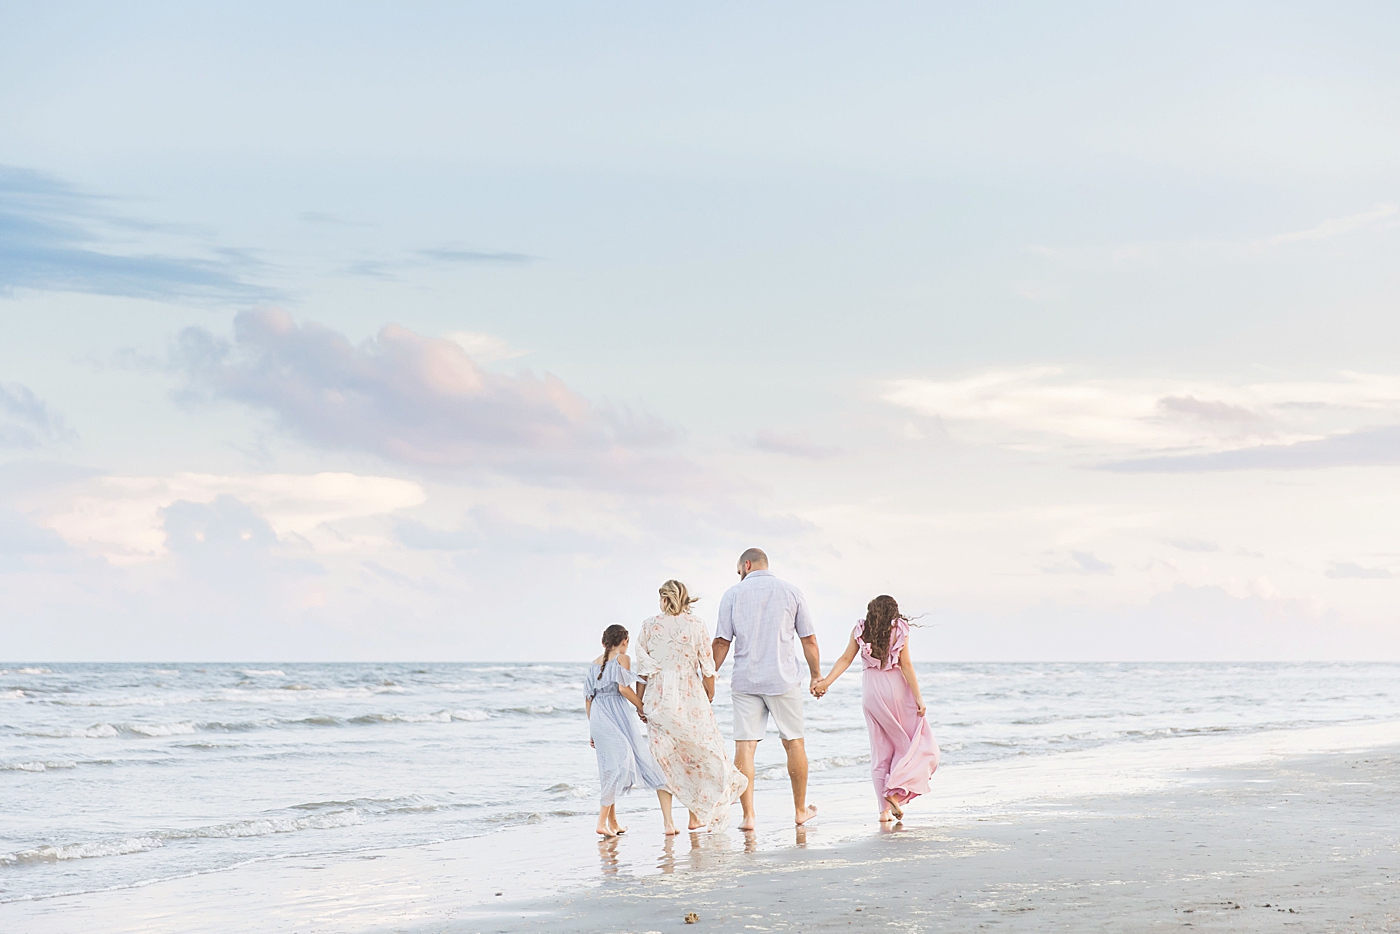 Family walking along the water on the beach. Photo by Fresh Light Photography.